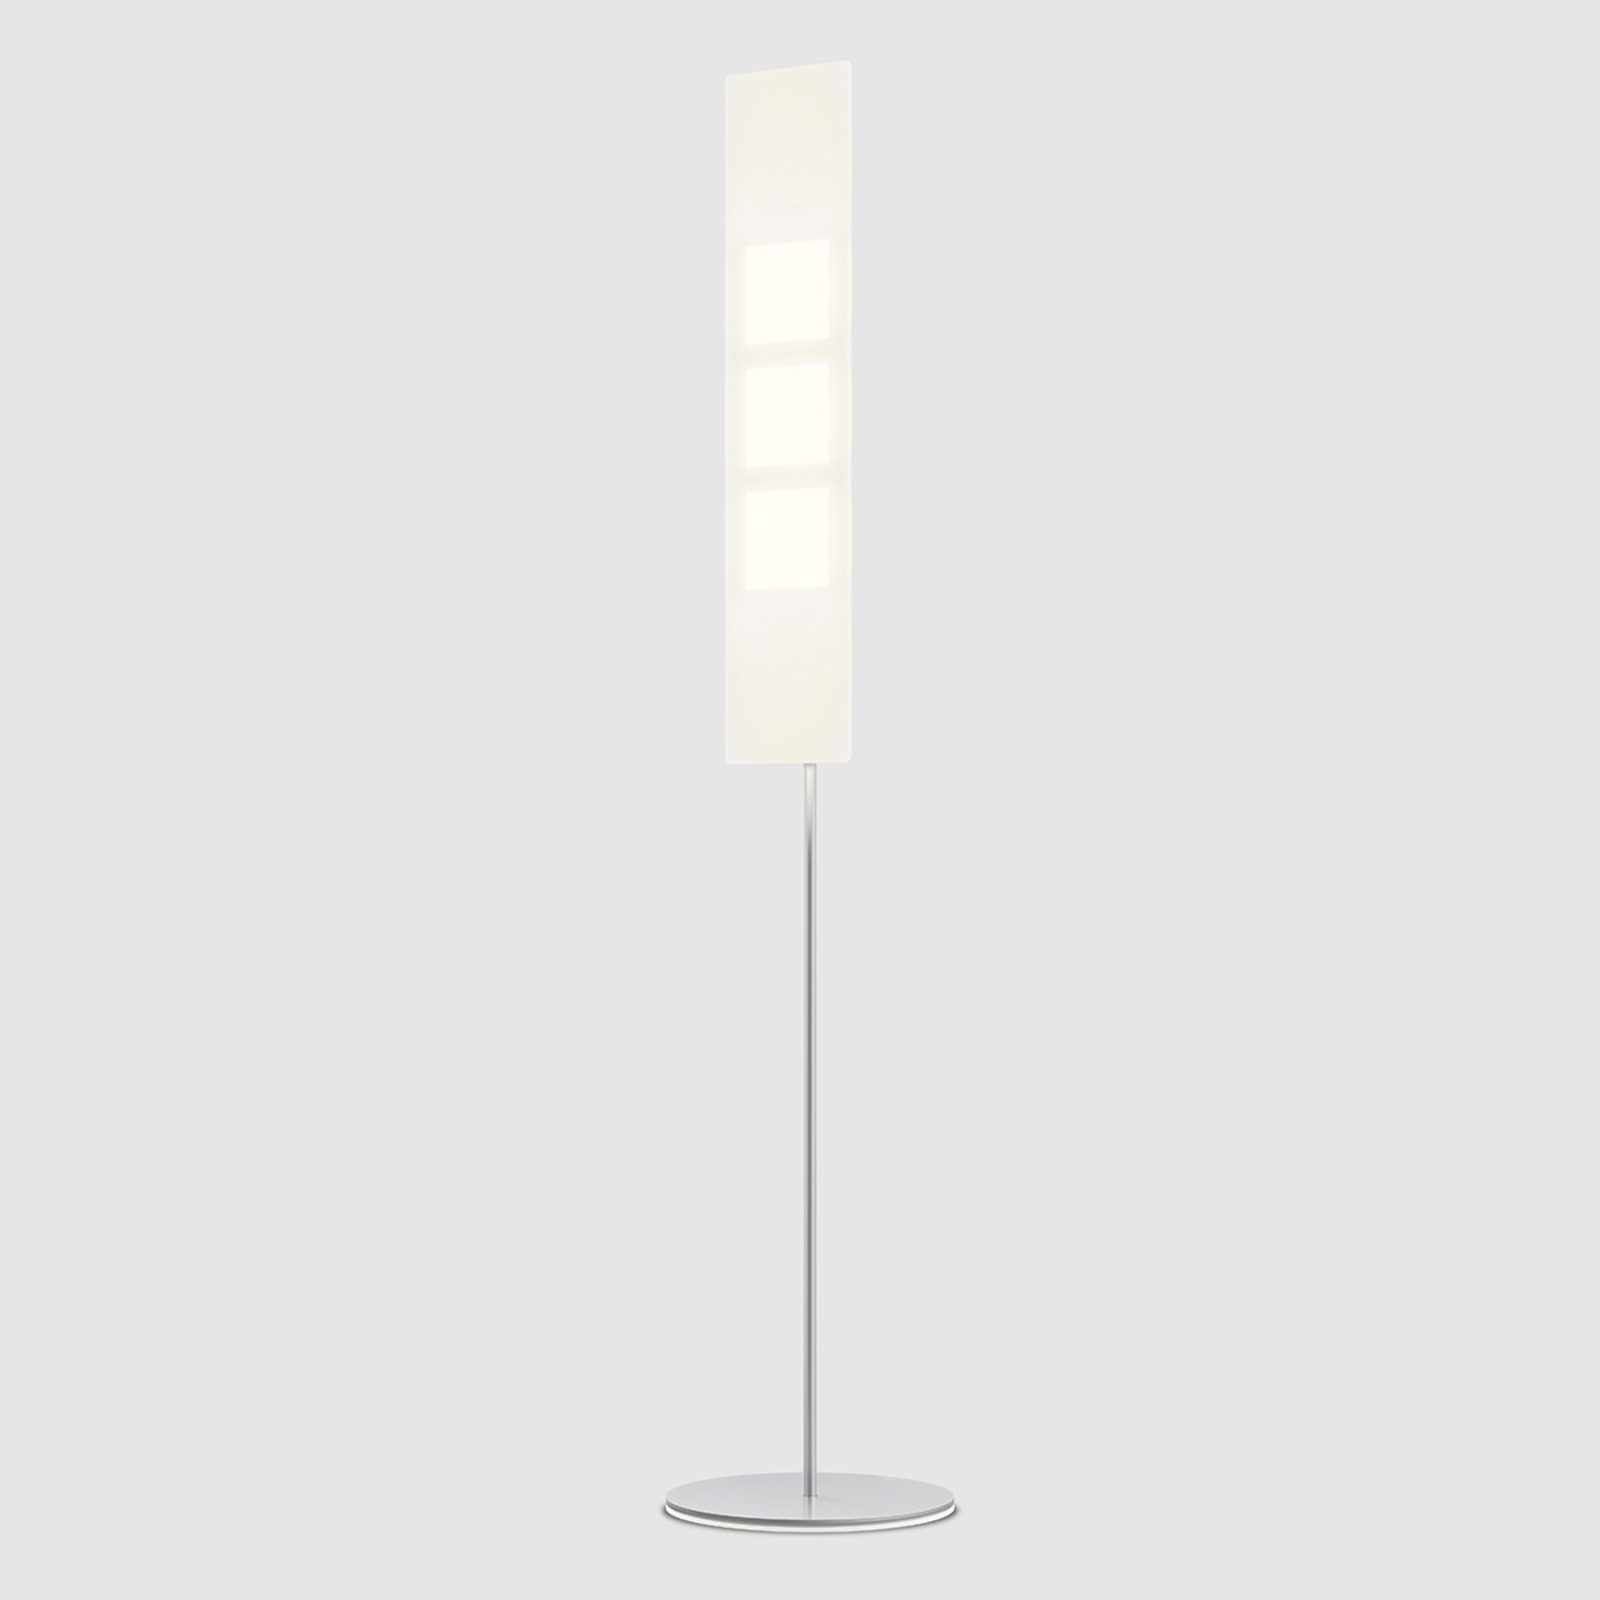 OMLED One f3l - black floor lamp with OLEDs